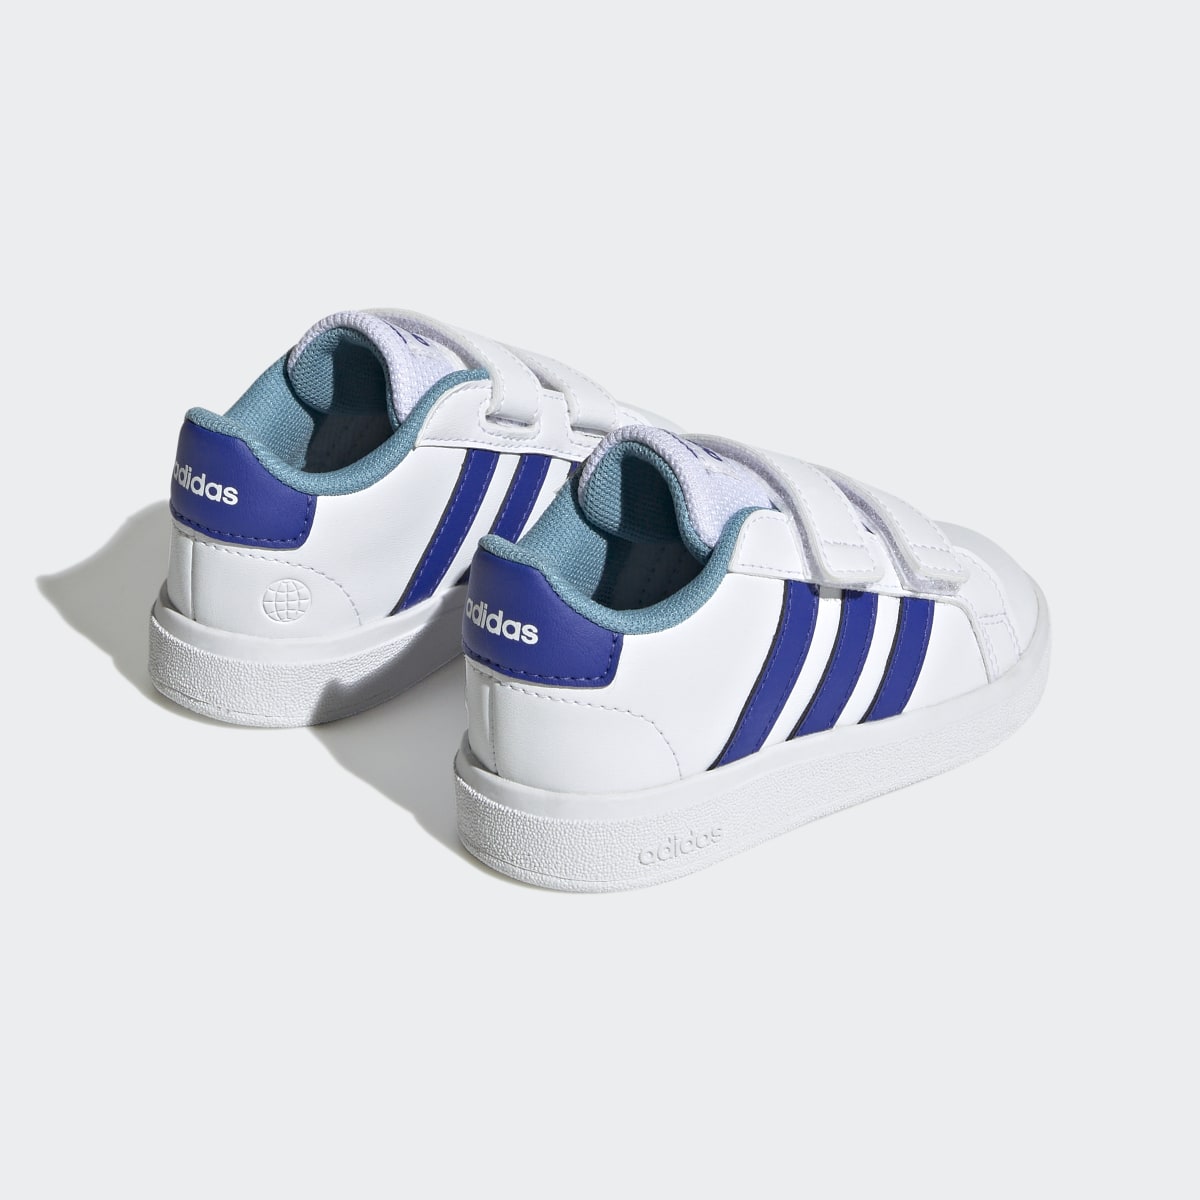 Adidas Grand Court Lifestyle Hook and Loop Schuh. 6